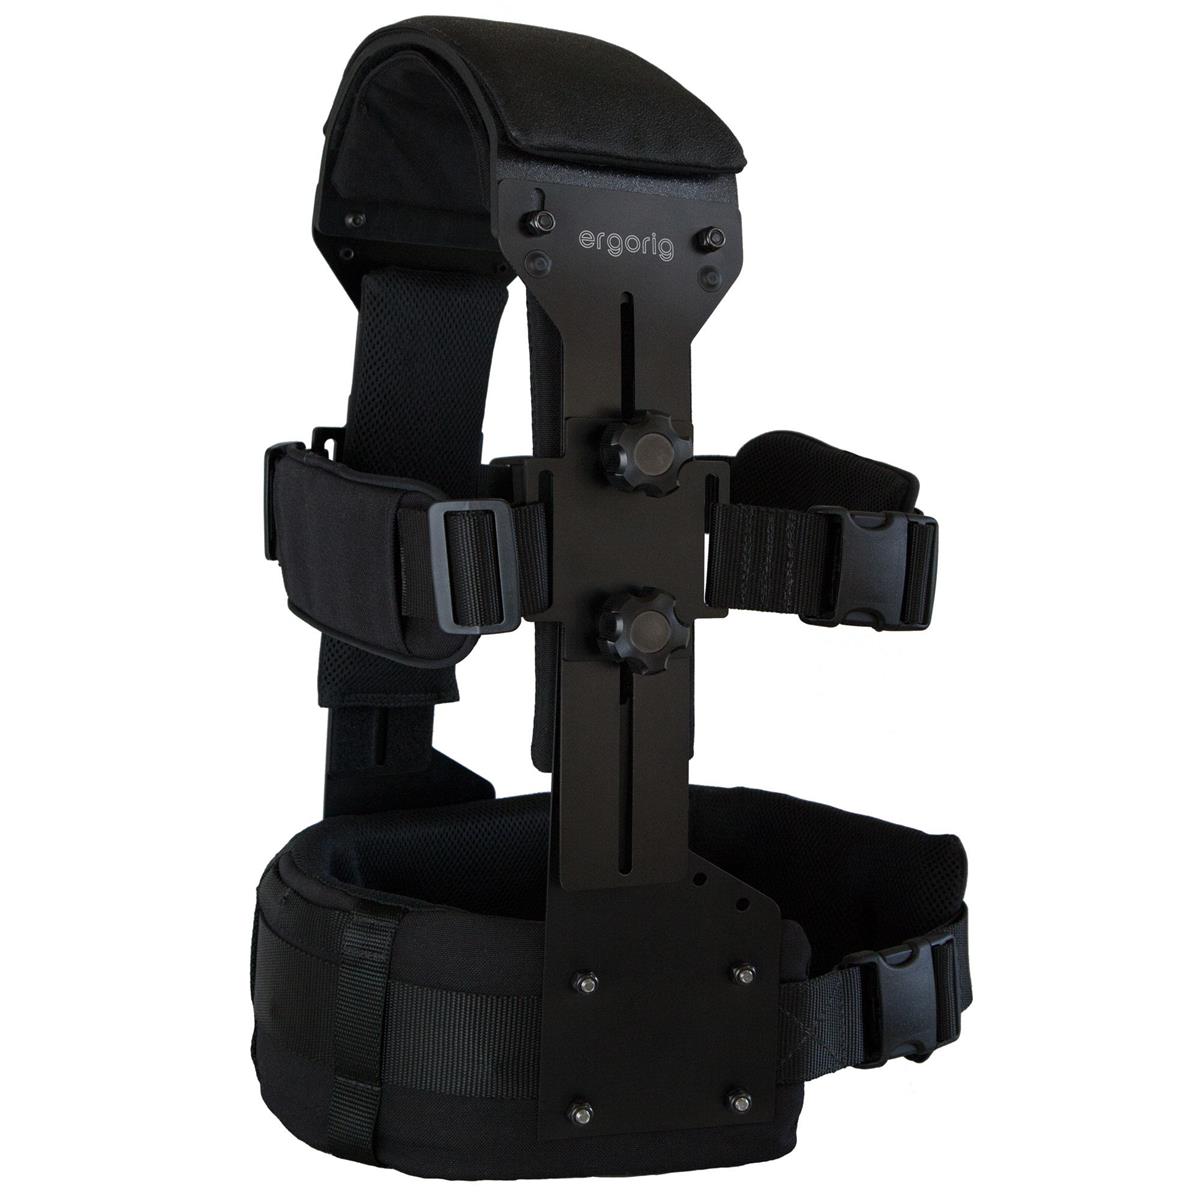 Image of Cinema Devices Ergorig Body Mounted Harness System with Carrying Bag